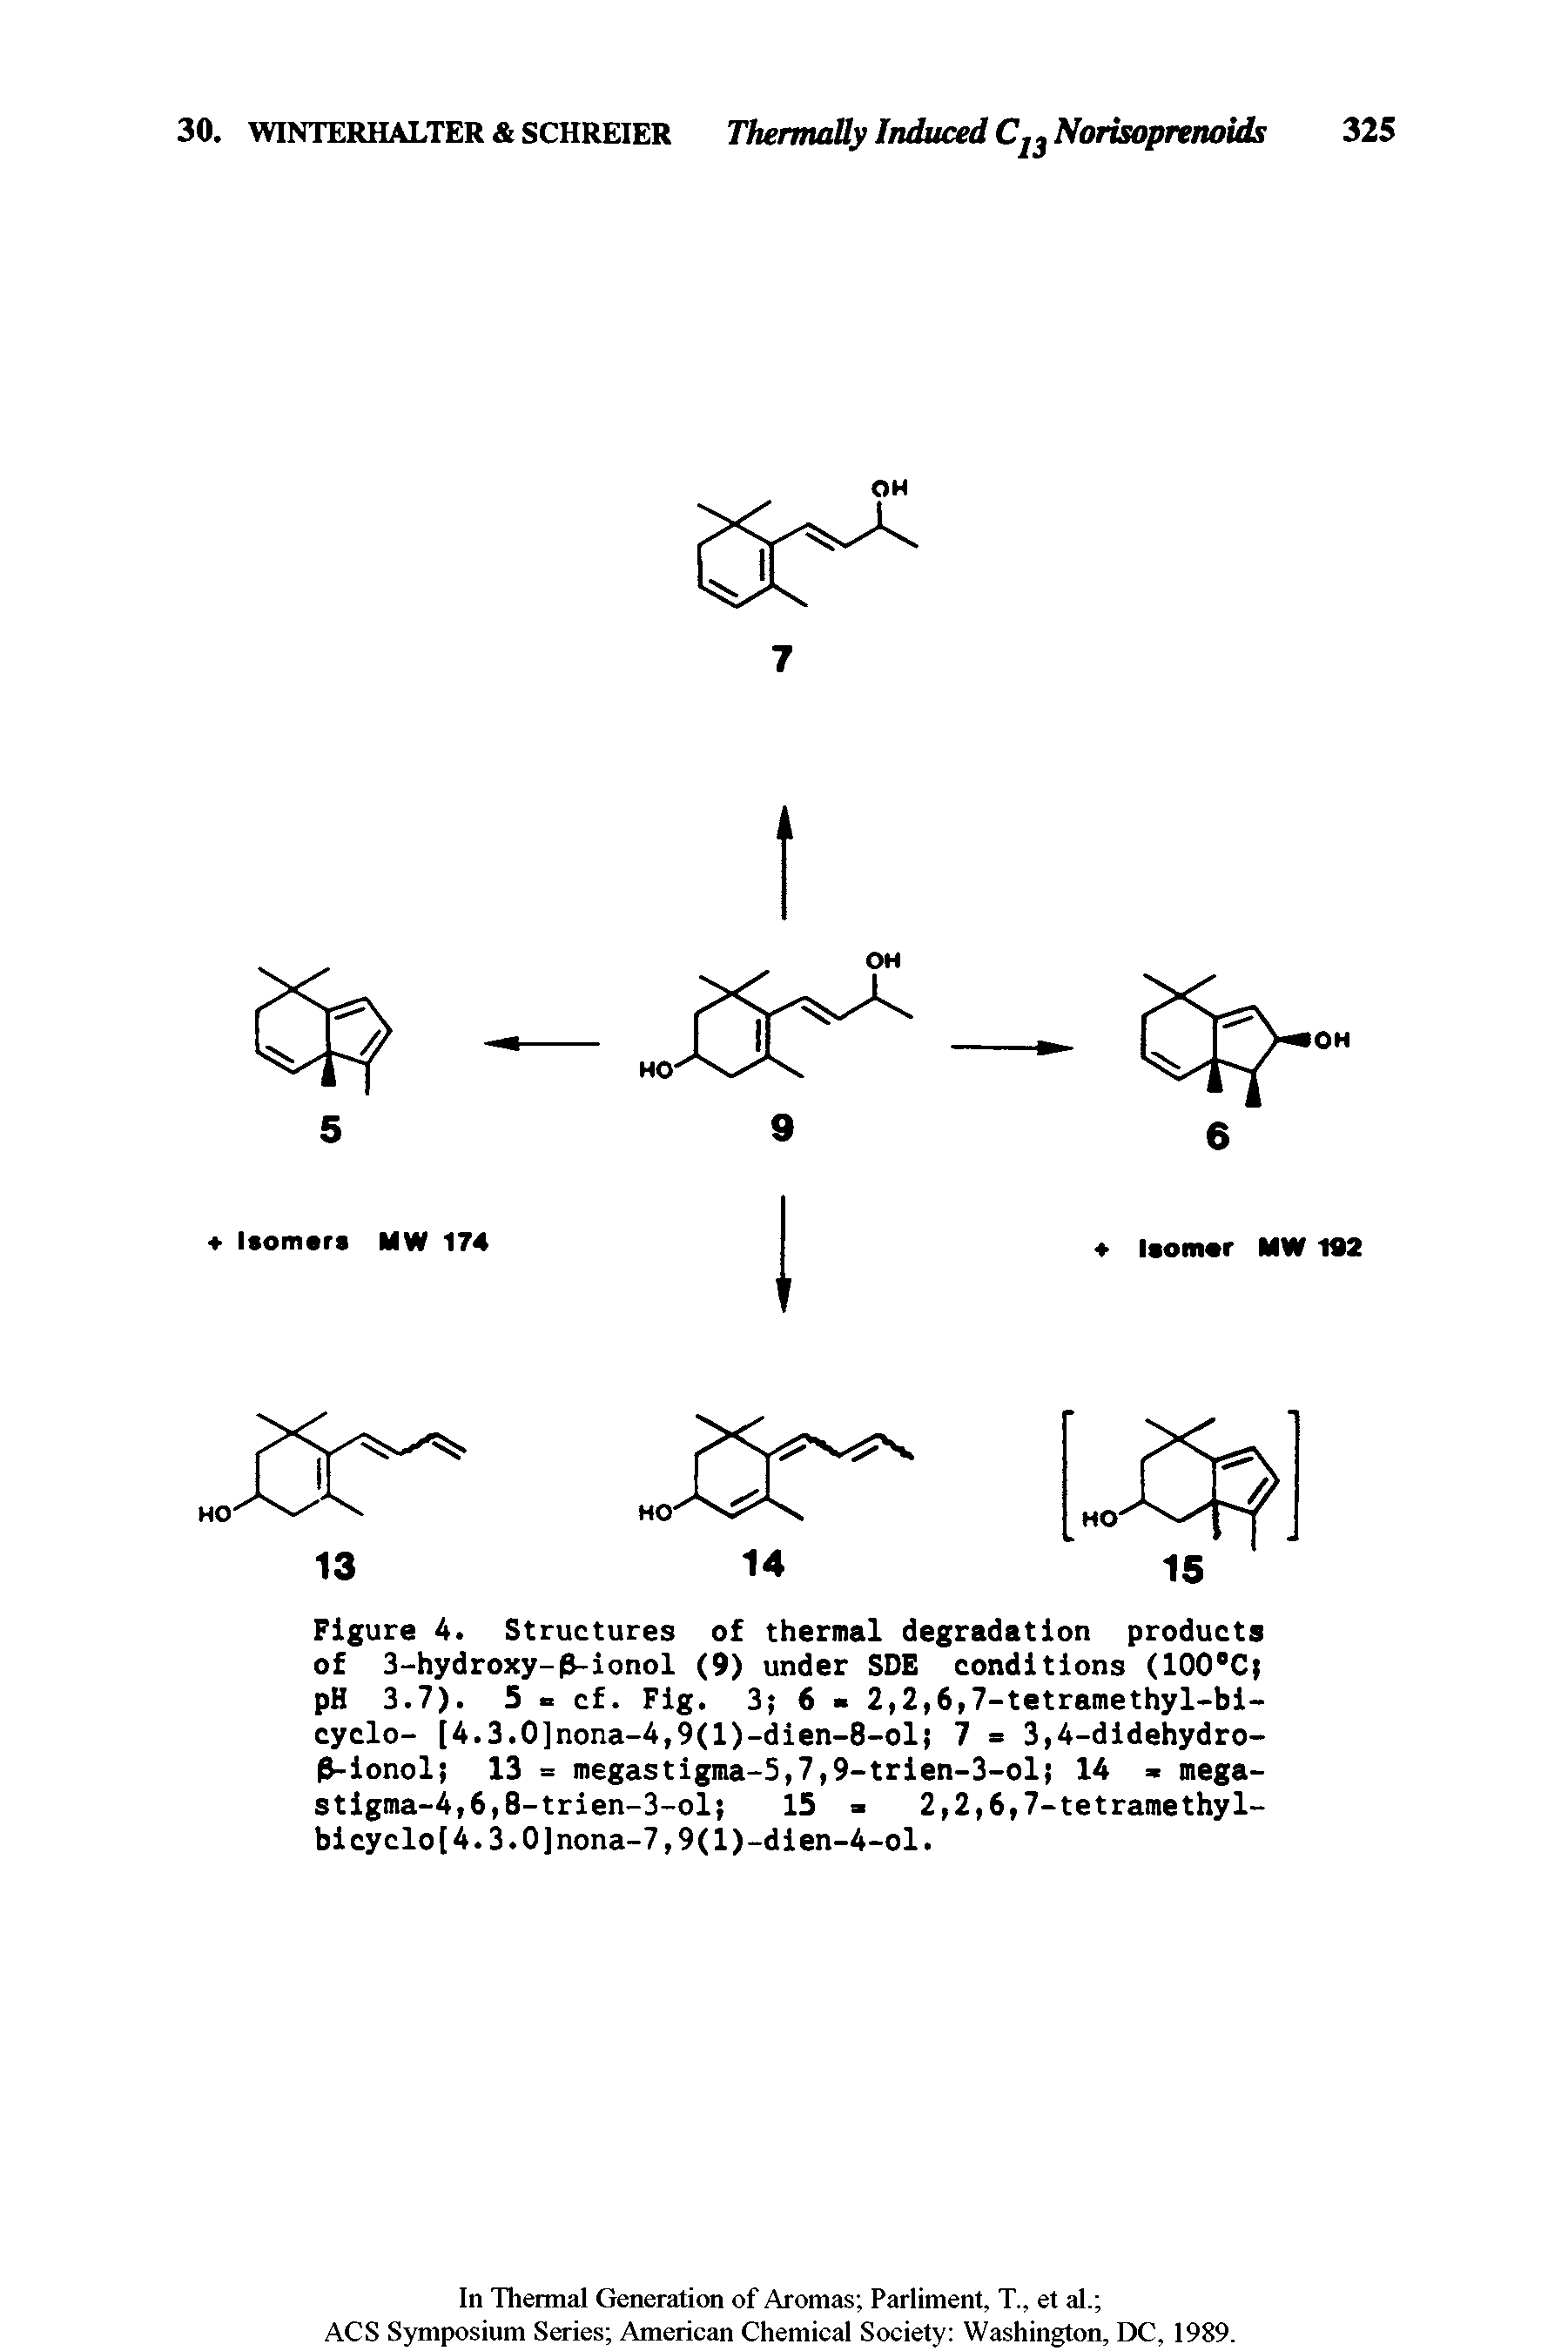 Figure 4. Structures of thermal degradation products of 3-hydroxy-P-ionol (9) under SDE conditions (100°Cj pH 3.7). 5 cf. Fig. 3 6 2,2,6,7-tetramethyl-bi-cyclo- [4.3.0]nona-4,9(l)-dien-8-oli 7 = 3,4-didehydro-P-ionoli 13 = megastigma-5,7,9-trien-3-oli 14 mega-stigma-4, 6,8-trien-3-ol 15 > 2,2,6,7-tetramethyl-bi cyclo[4.3.0]nona-7,9(1)-di en-4-ol.